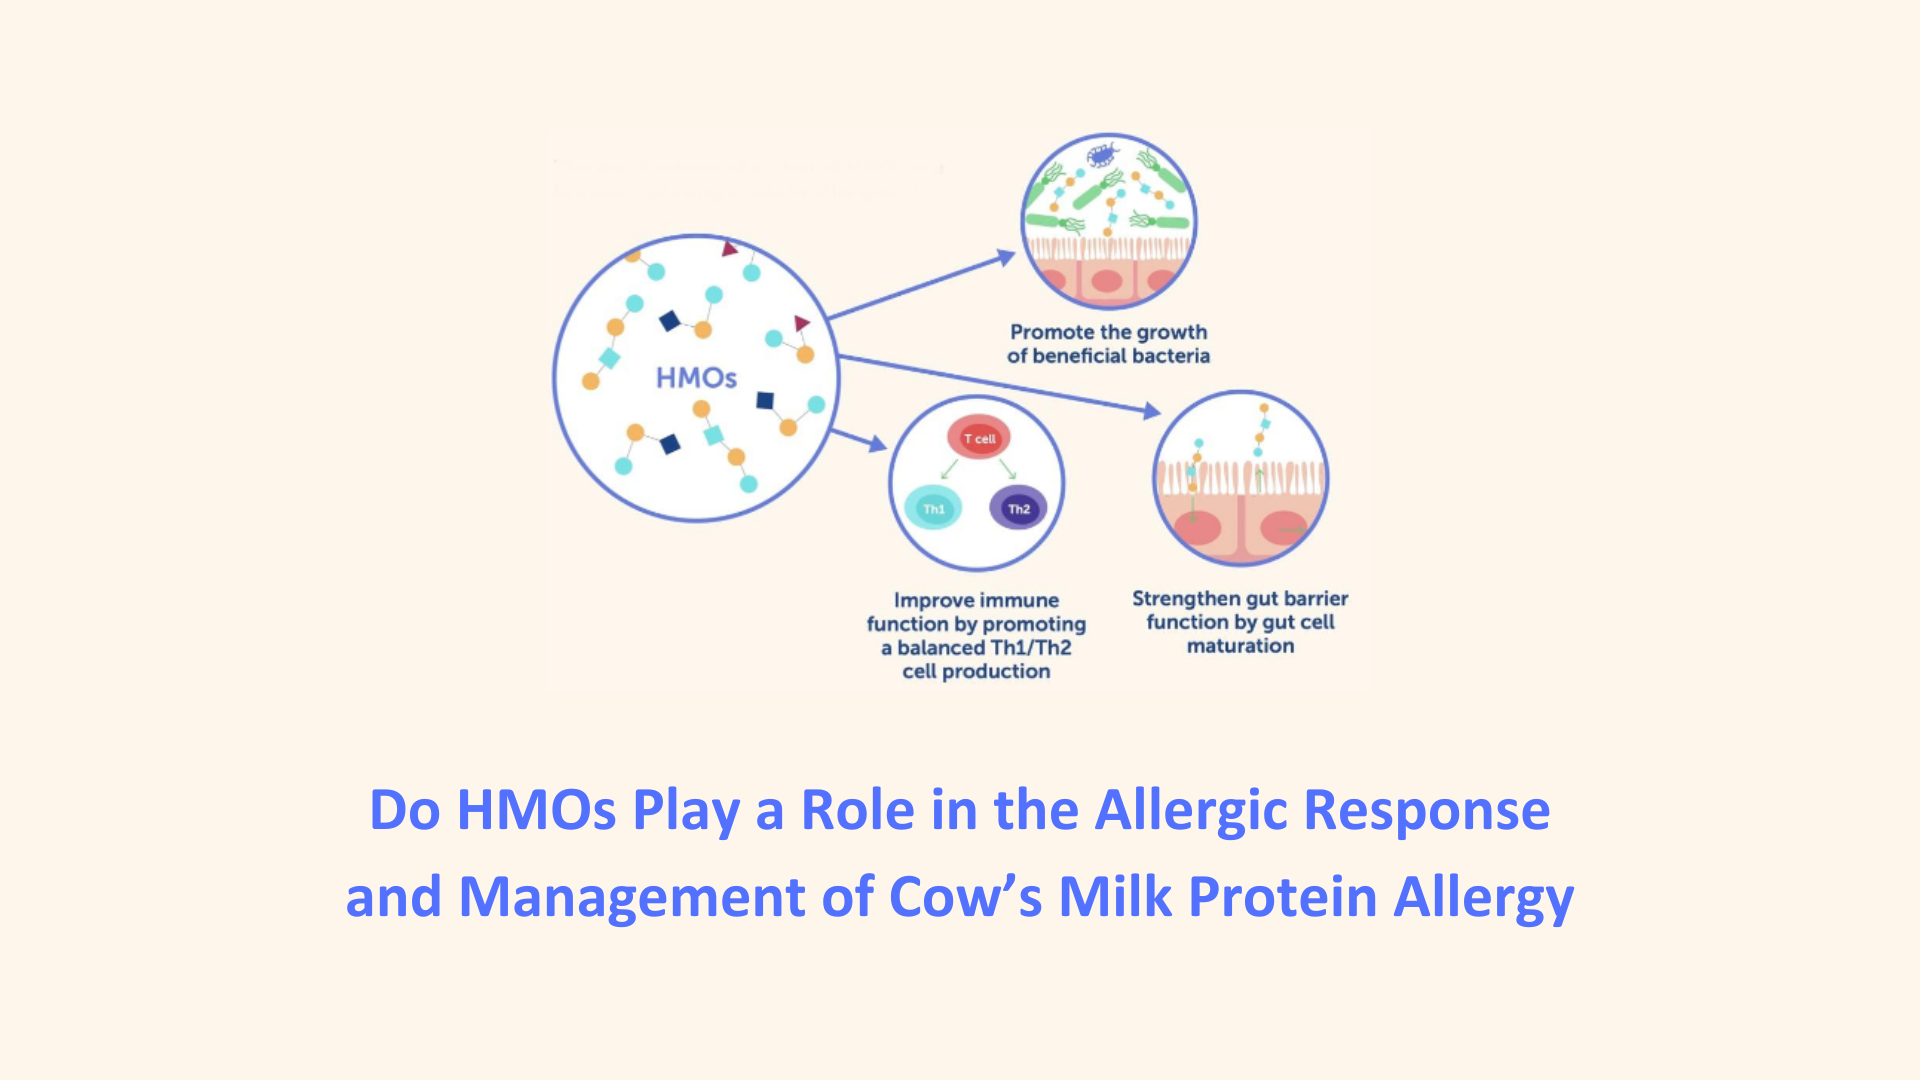 Do HMOs Play a Role in the Allergic Response and Management of Cow’s Milk Protein Allergy?